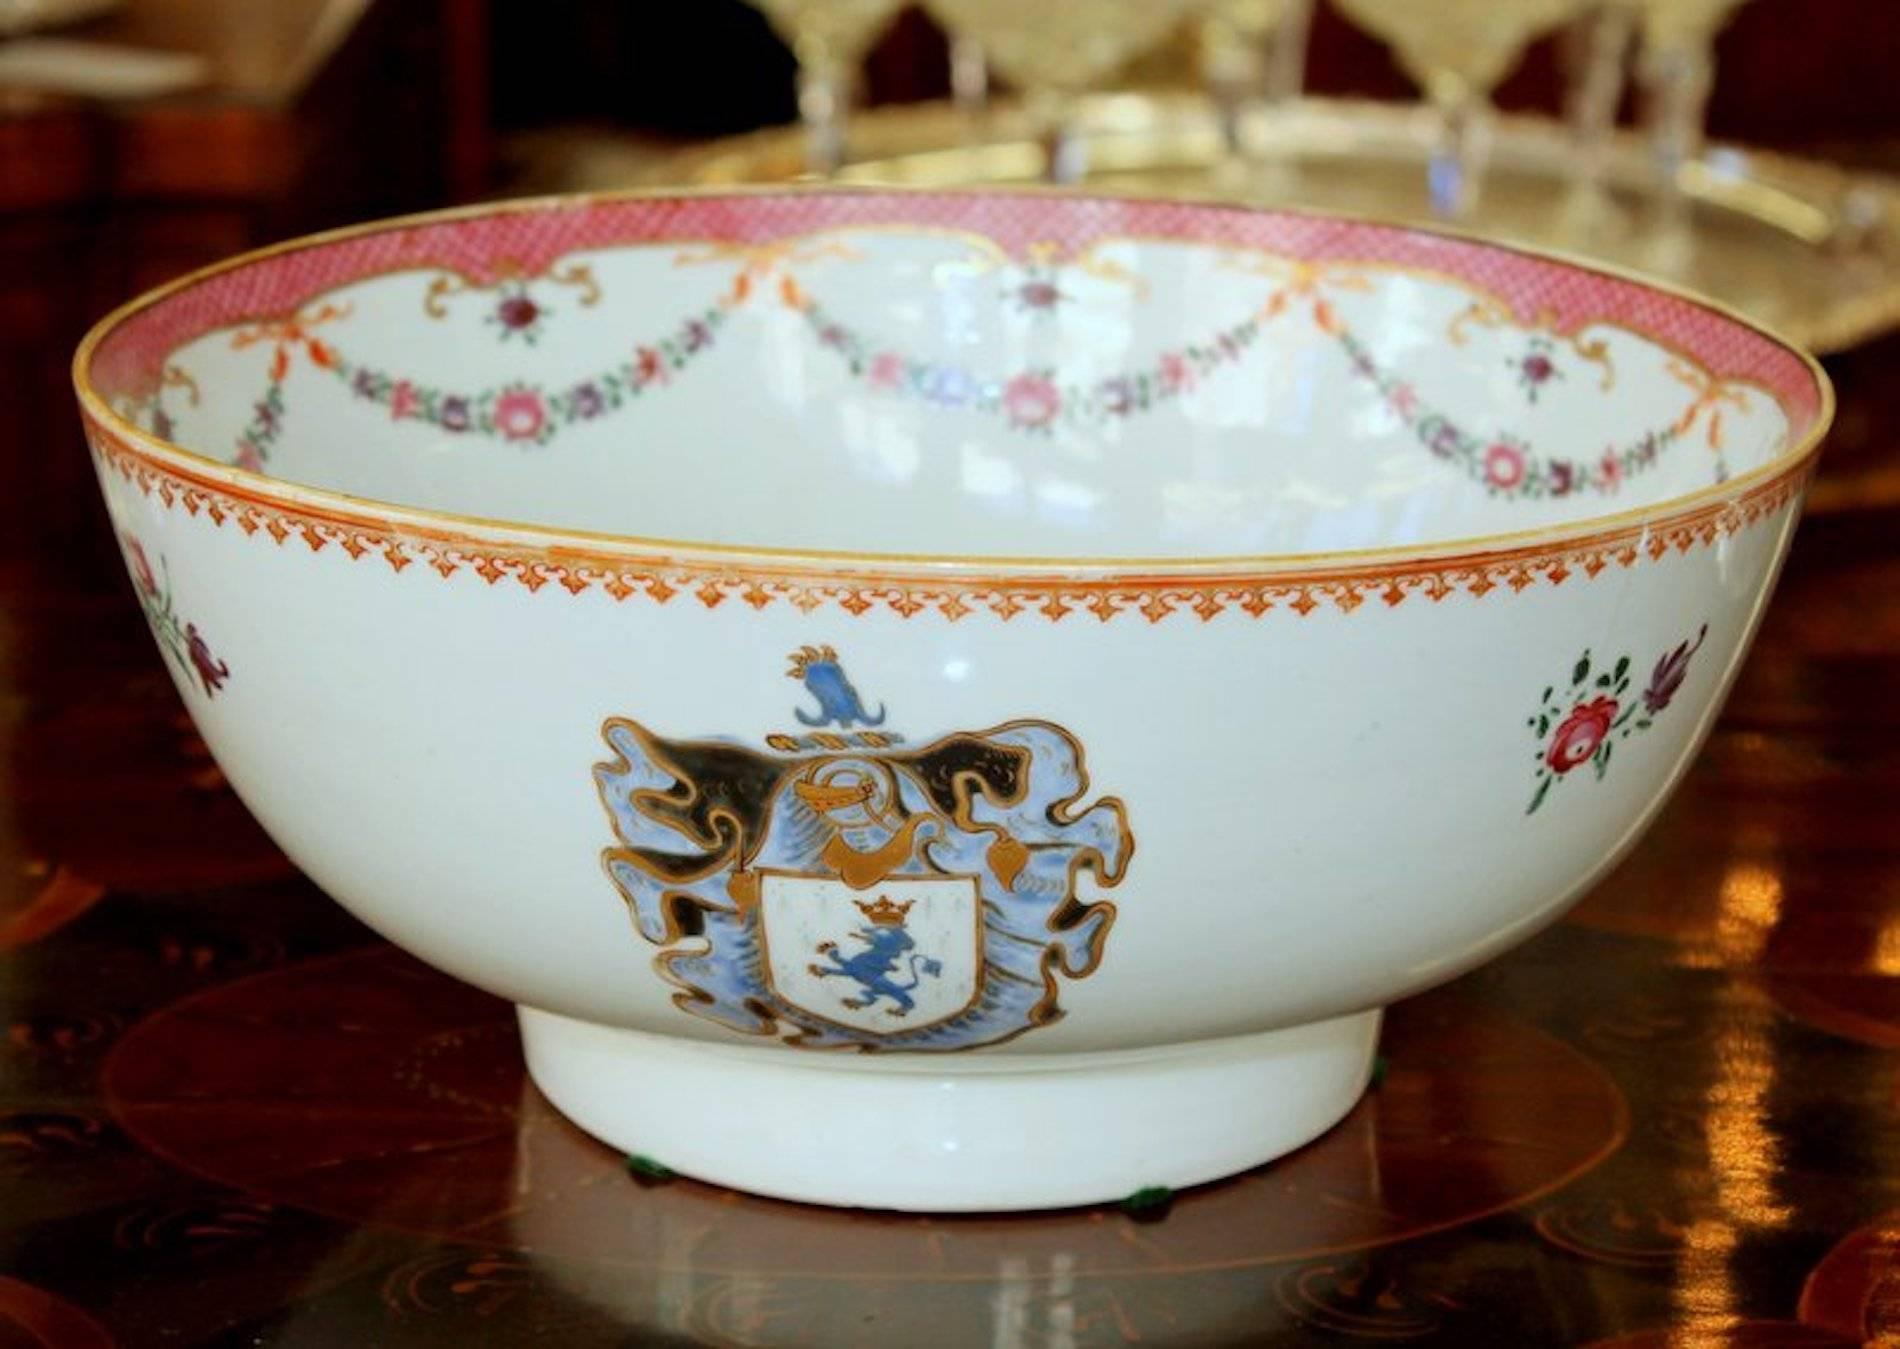 Superb quality antique Chinese export hand-painted porcelain 